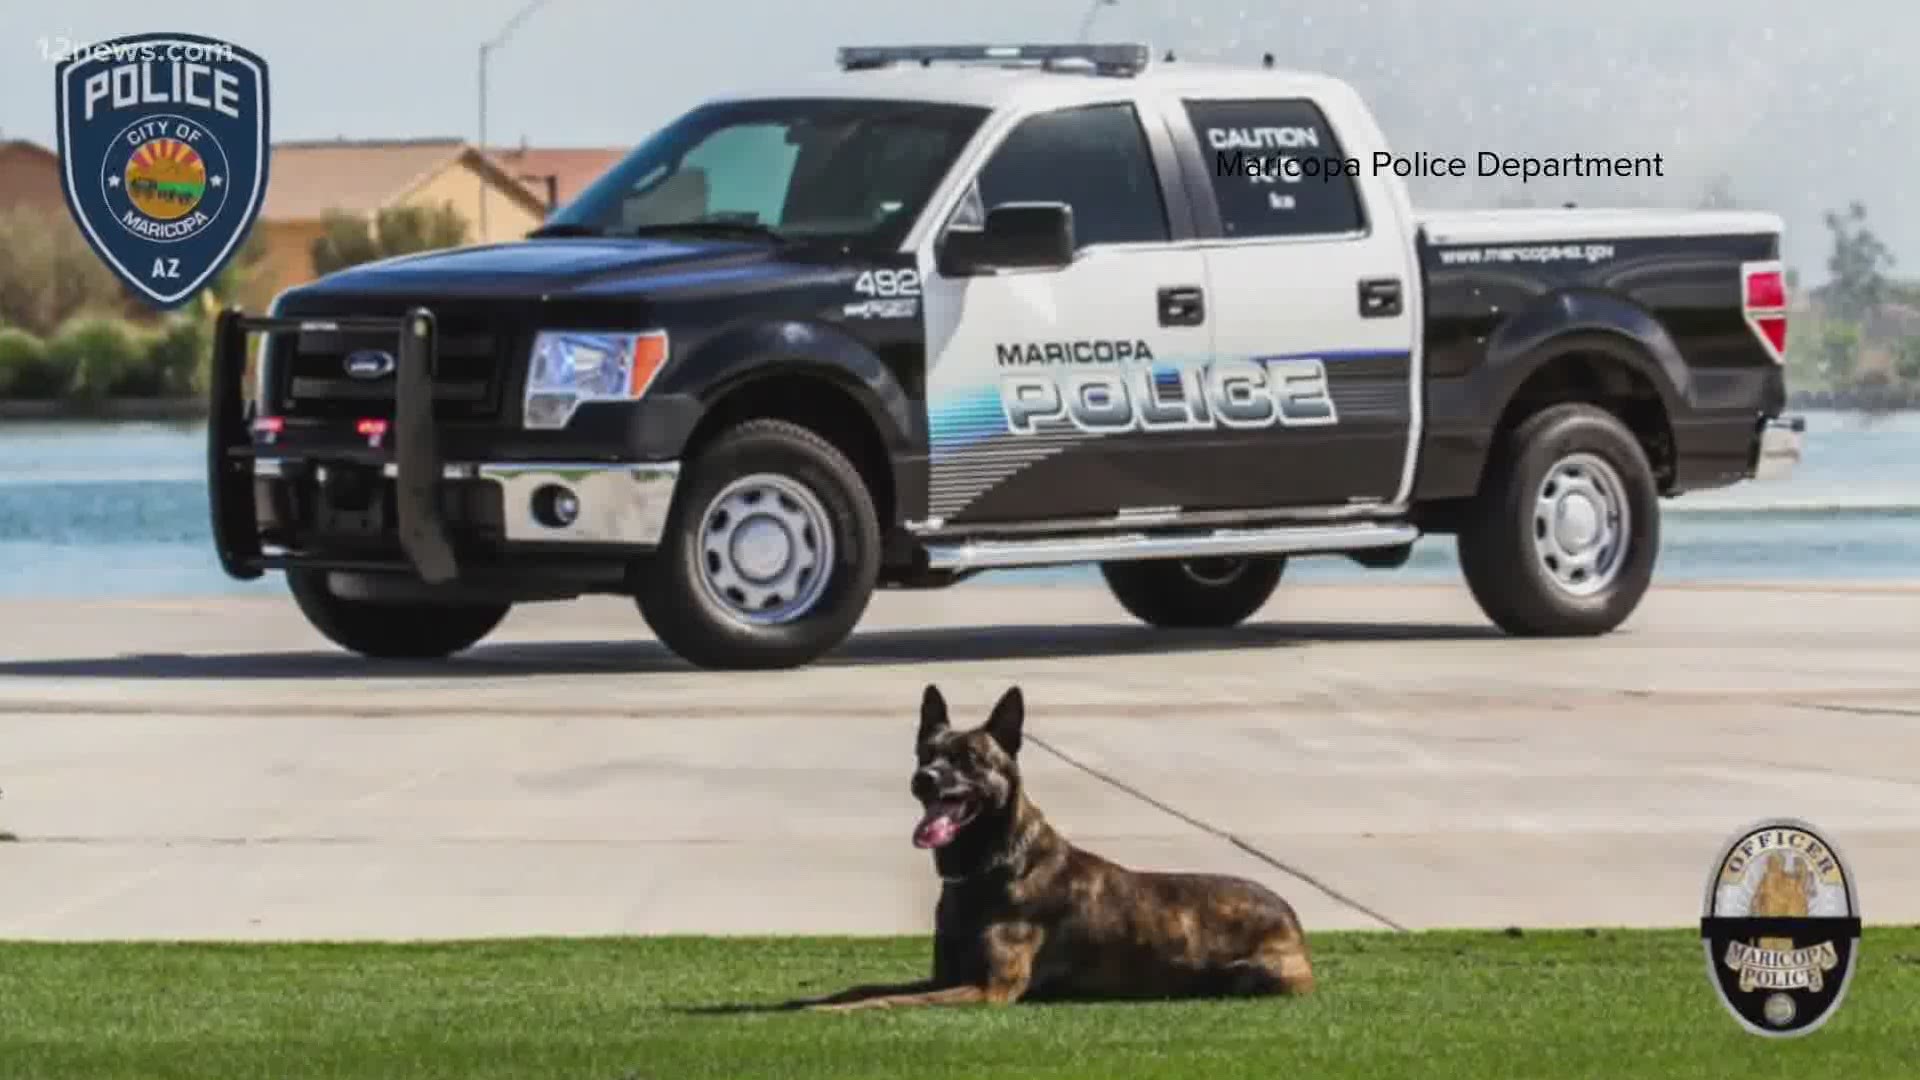 K-9 Ike was with the department for almost 11 years. What exactly caused his death is a mystery and an investigation into the death has been opened.